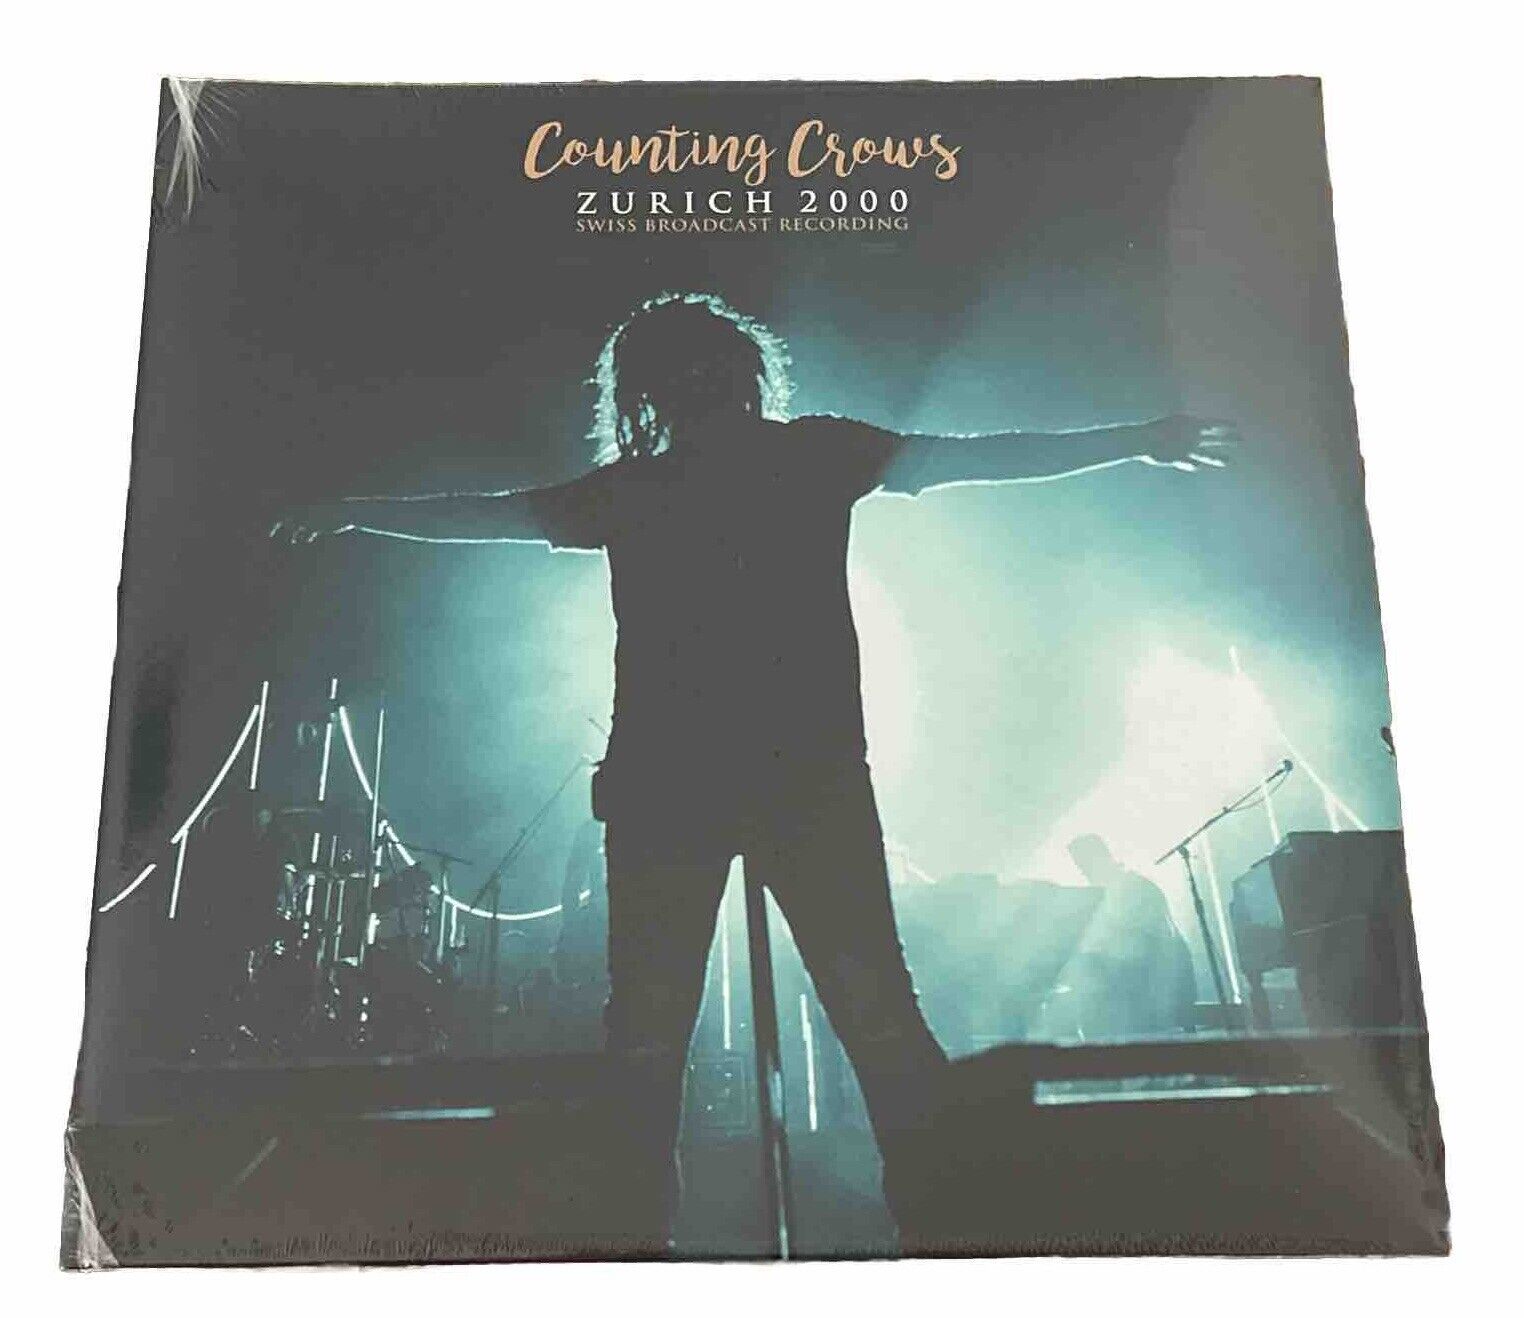 Counting Crows Zurich 2000 Swiss Broadcast Recording Vinyl Sealed New